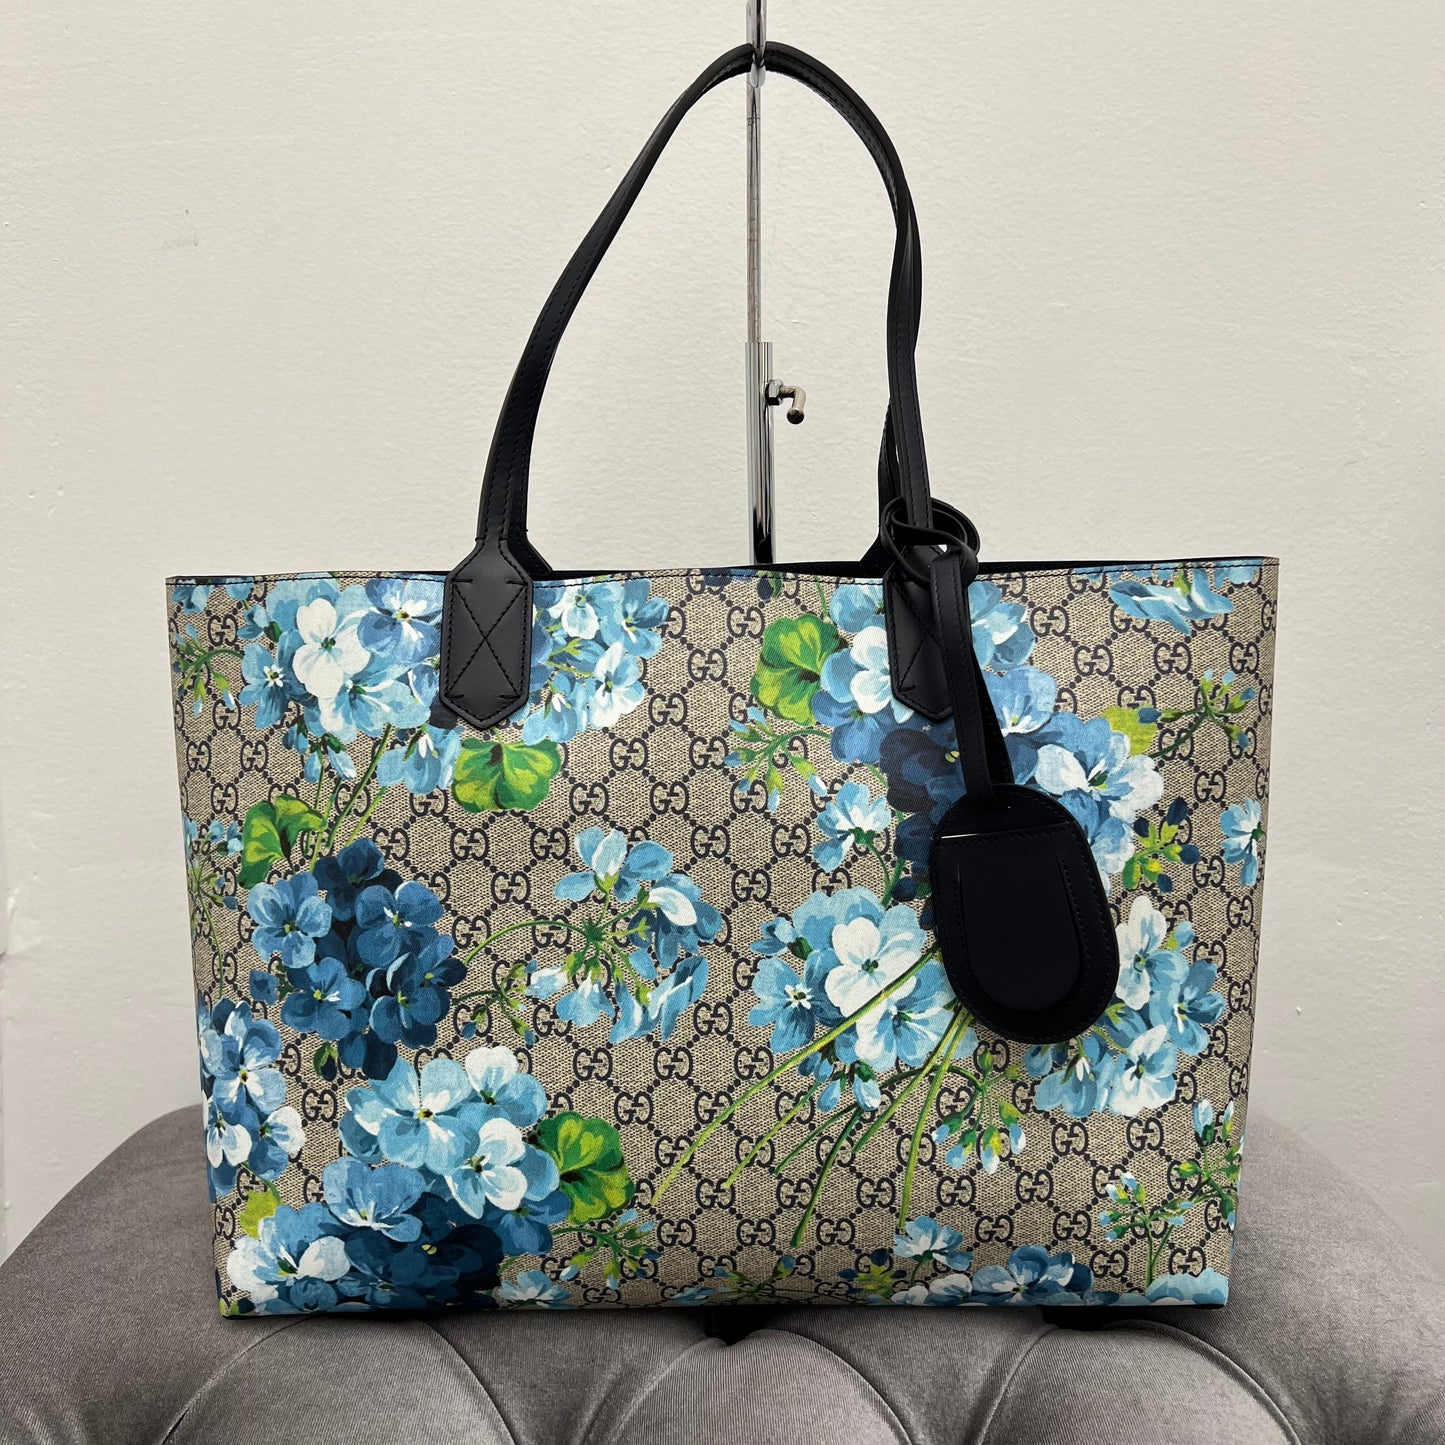 Gucci Blooms Tote